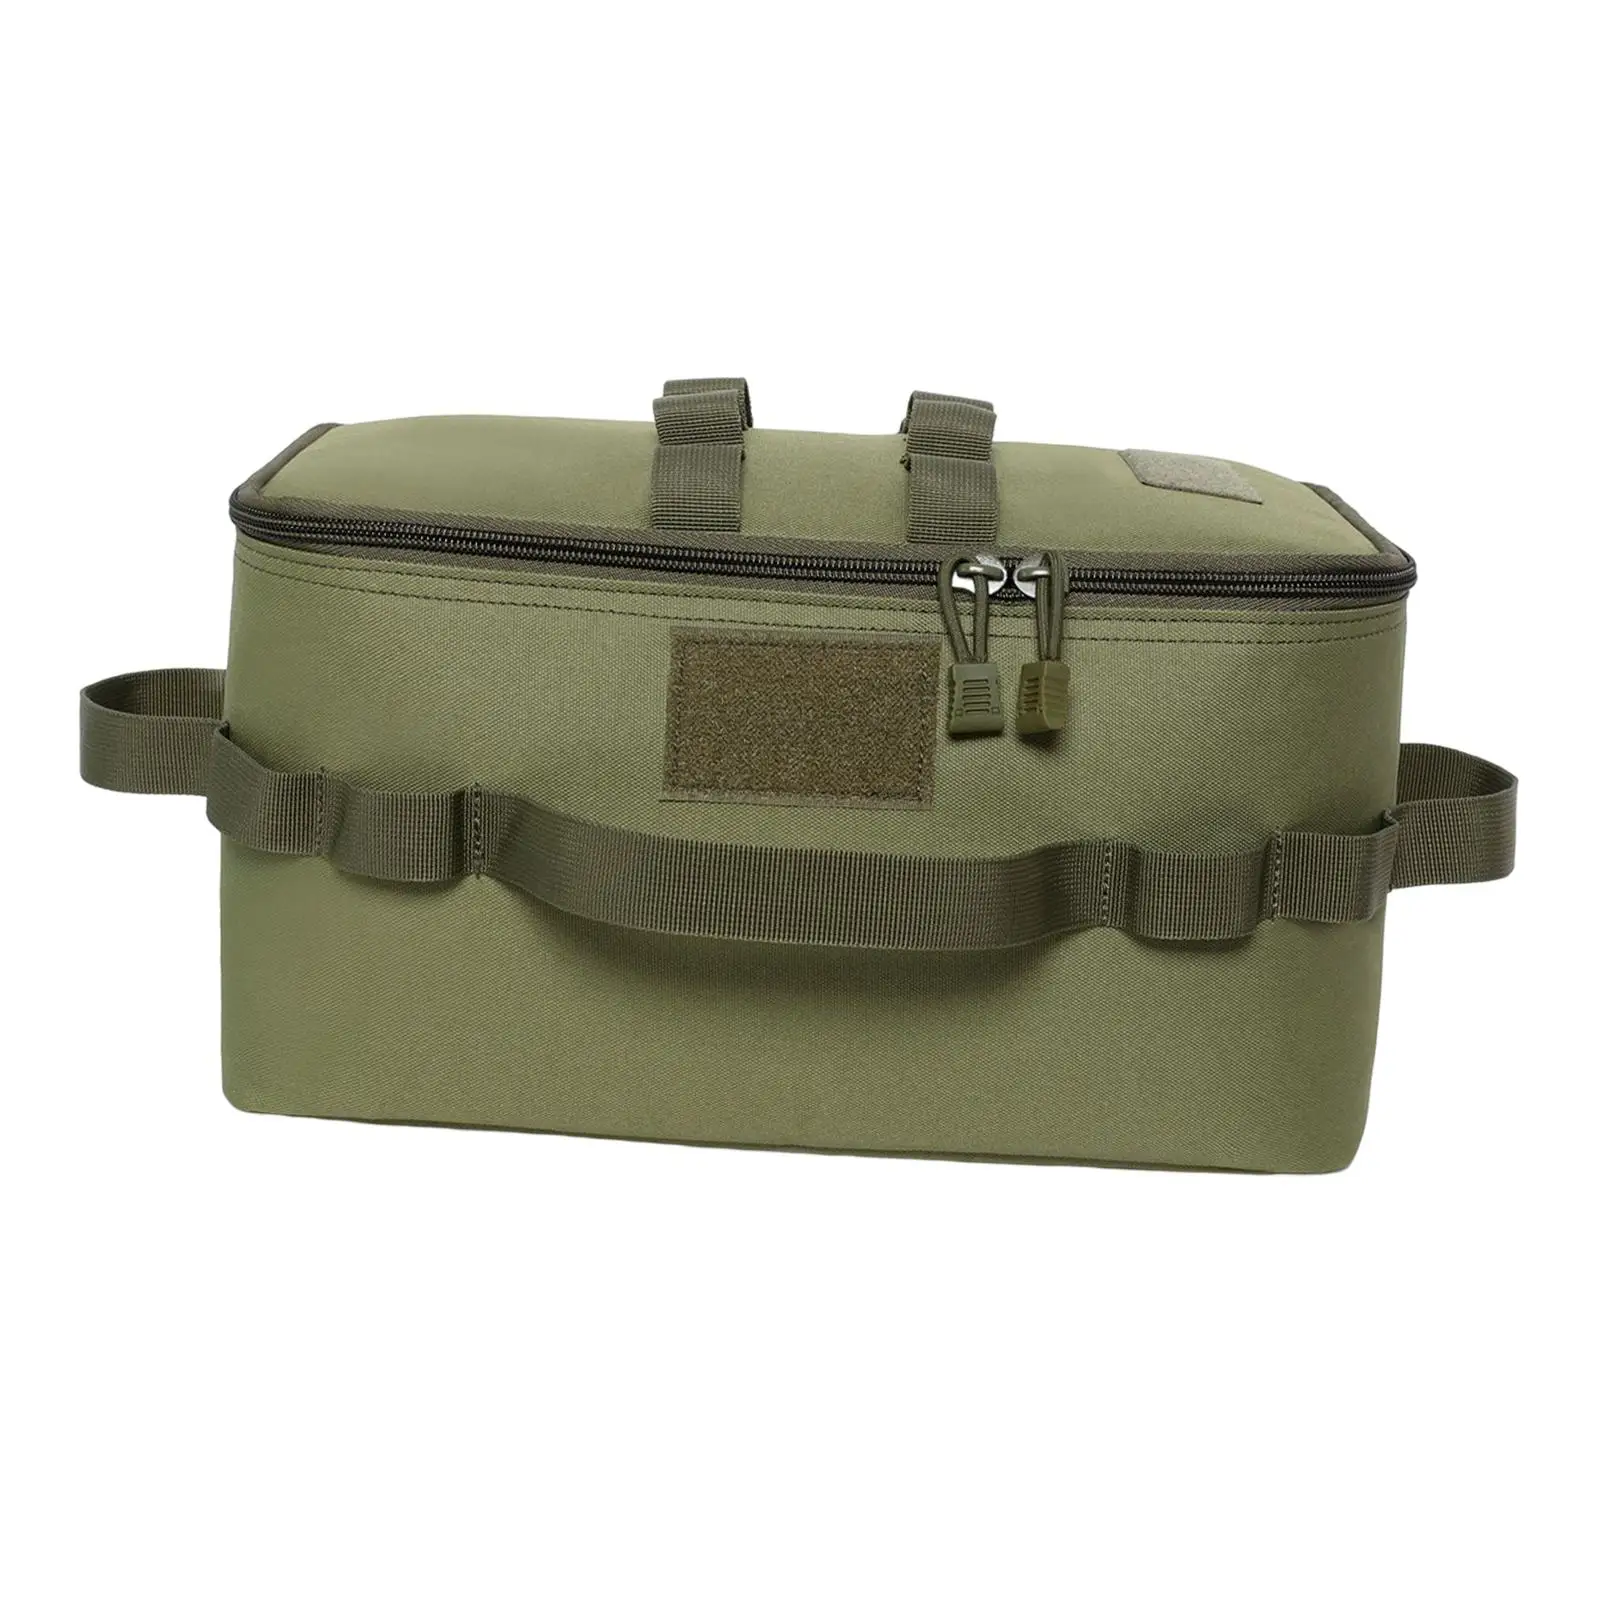 storage bag for outdoor camping, foldable with carrying handles,